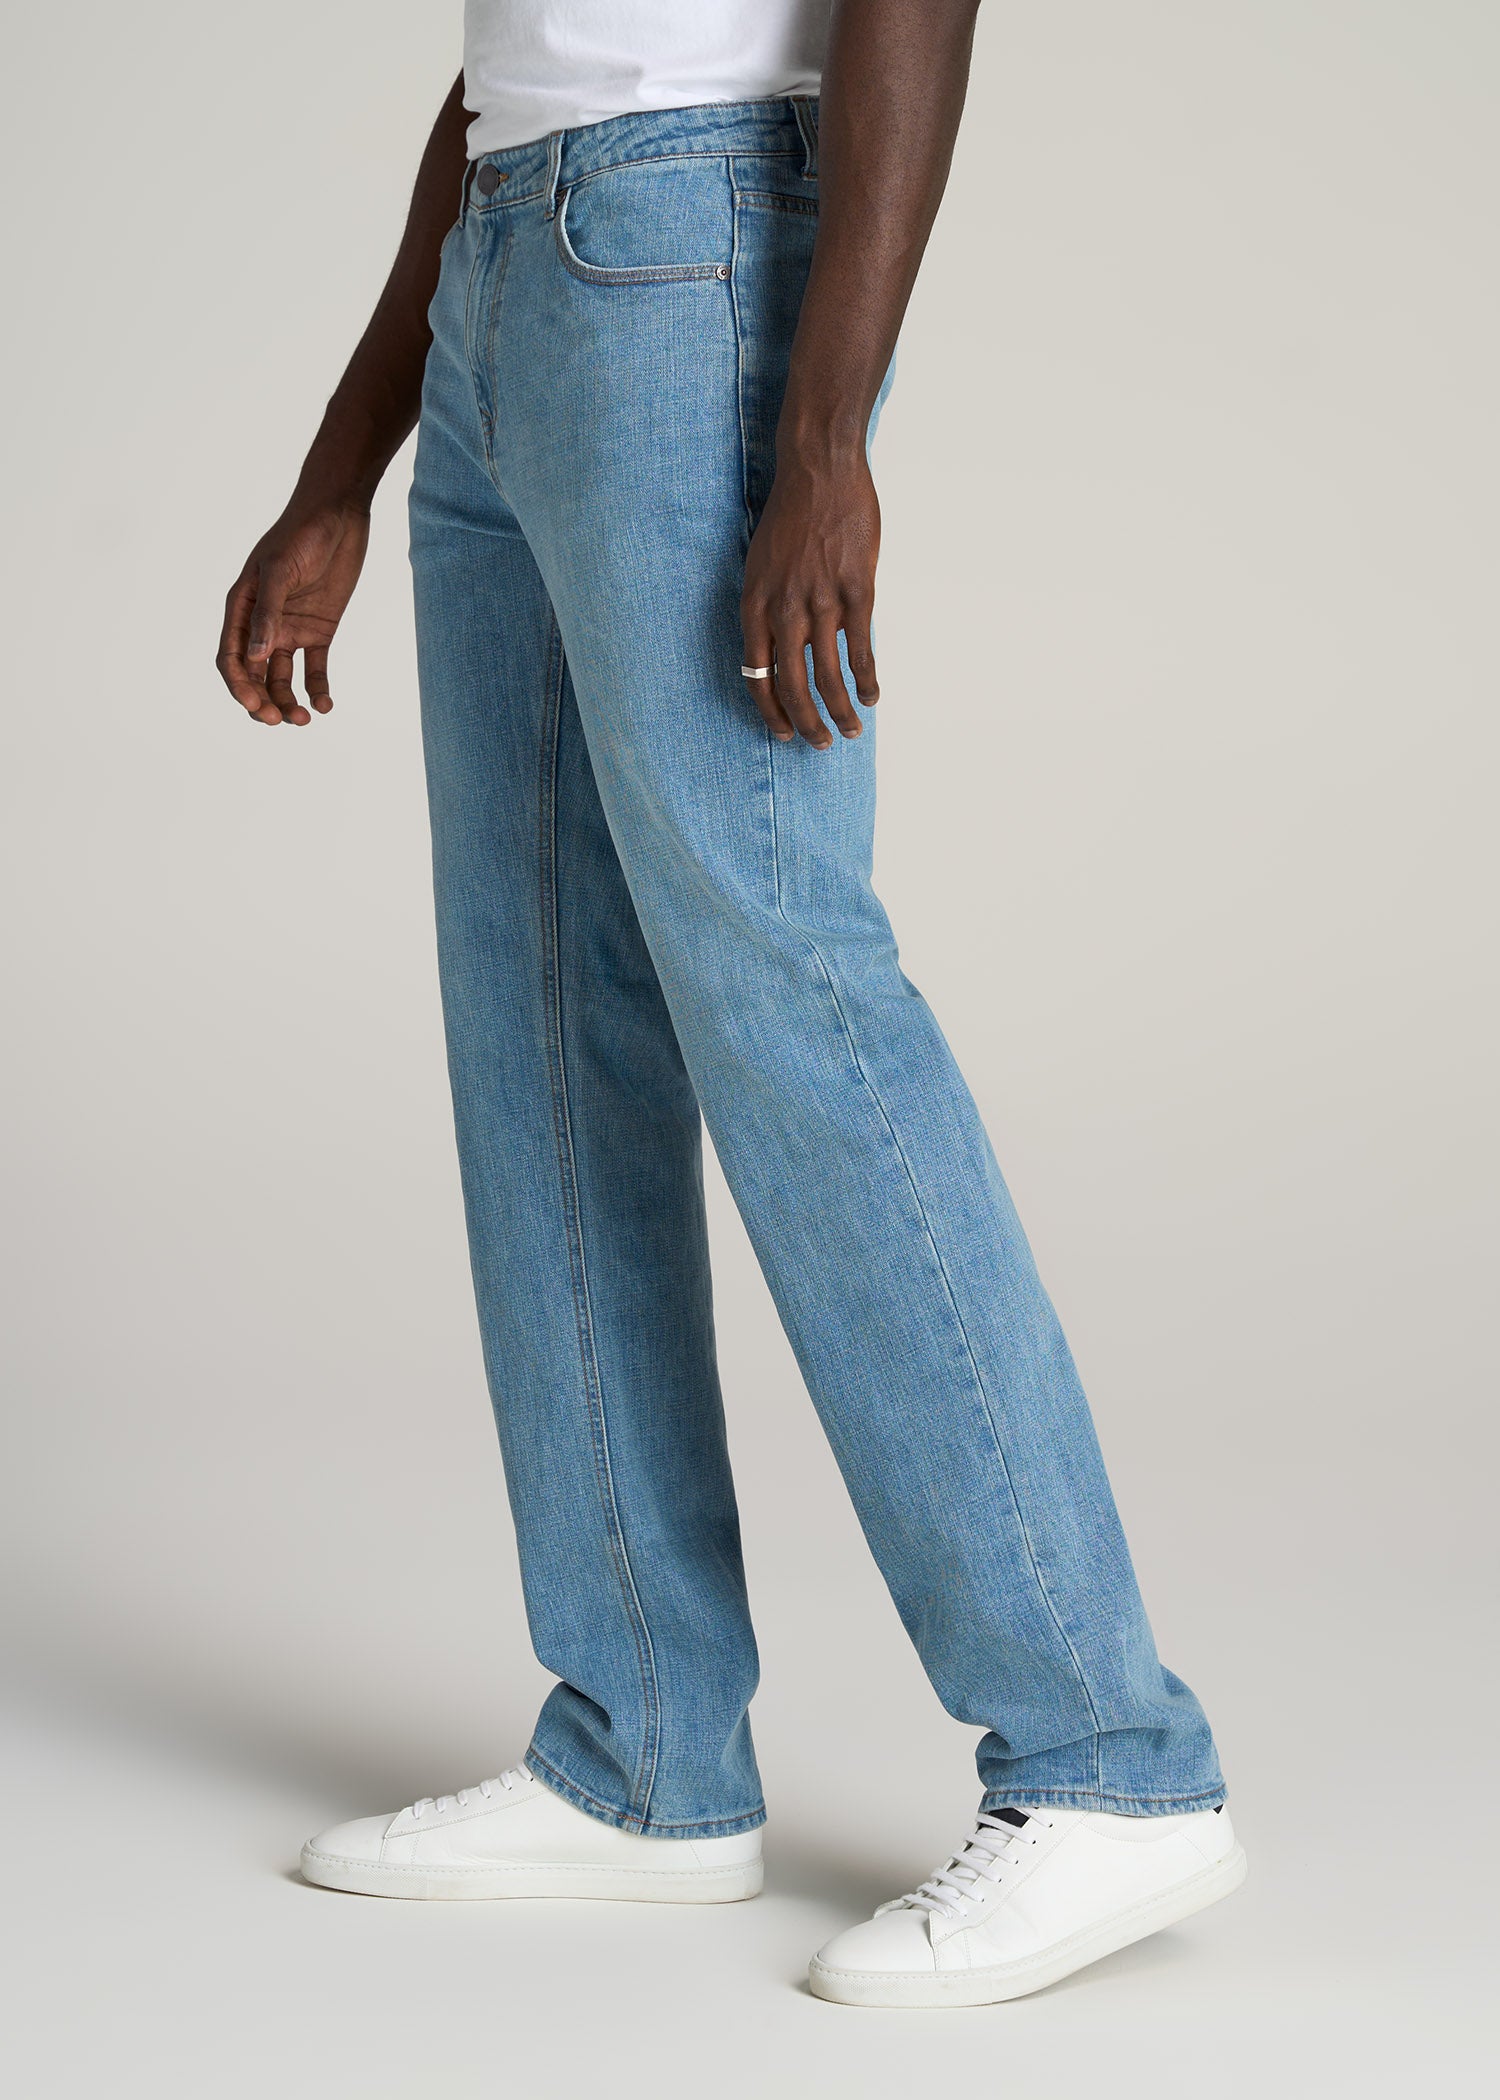 Tall Men's Jeans with Extra Long 36 38 40 Inseams